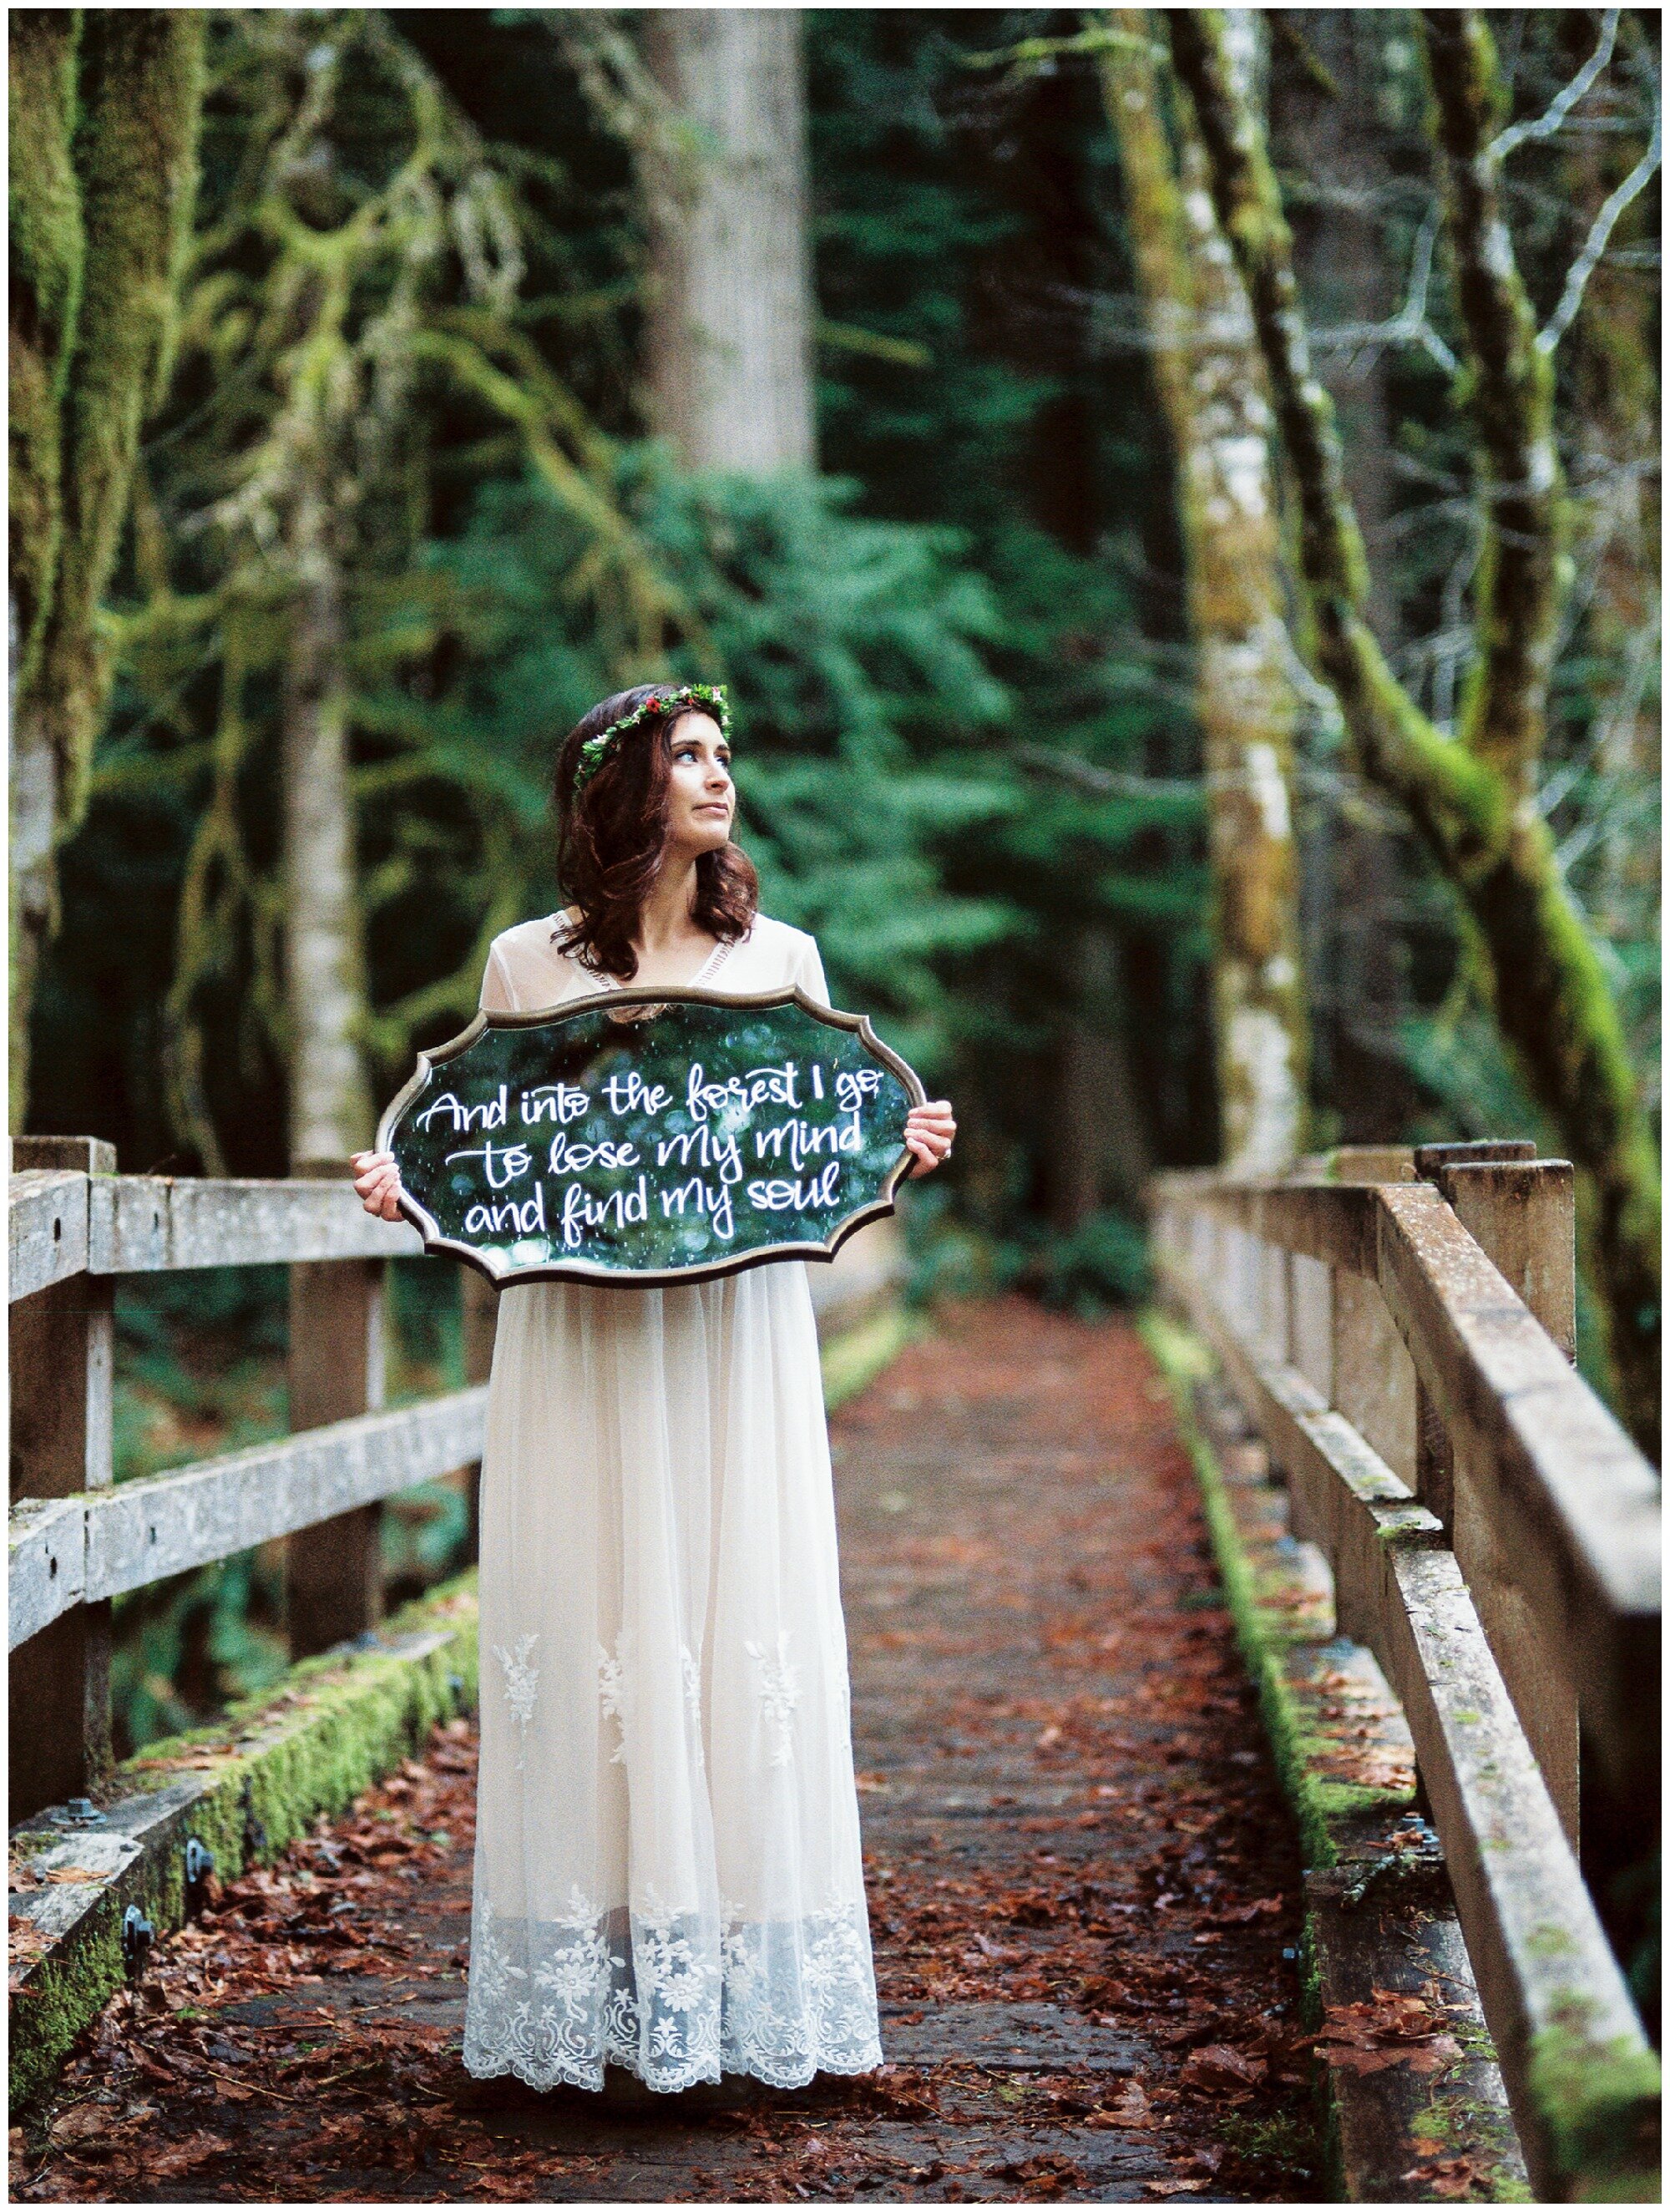 Lake Crescent Lodge wedding with John Muir quotes